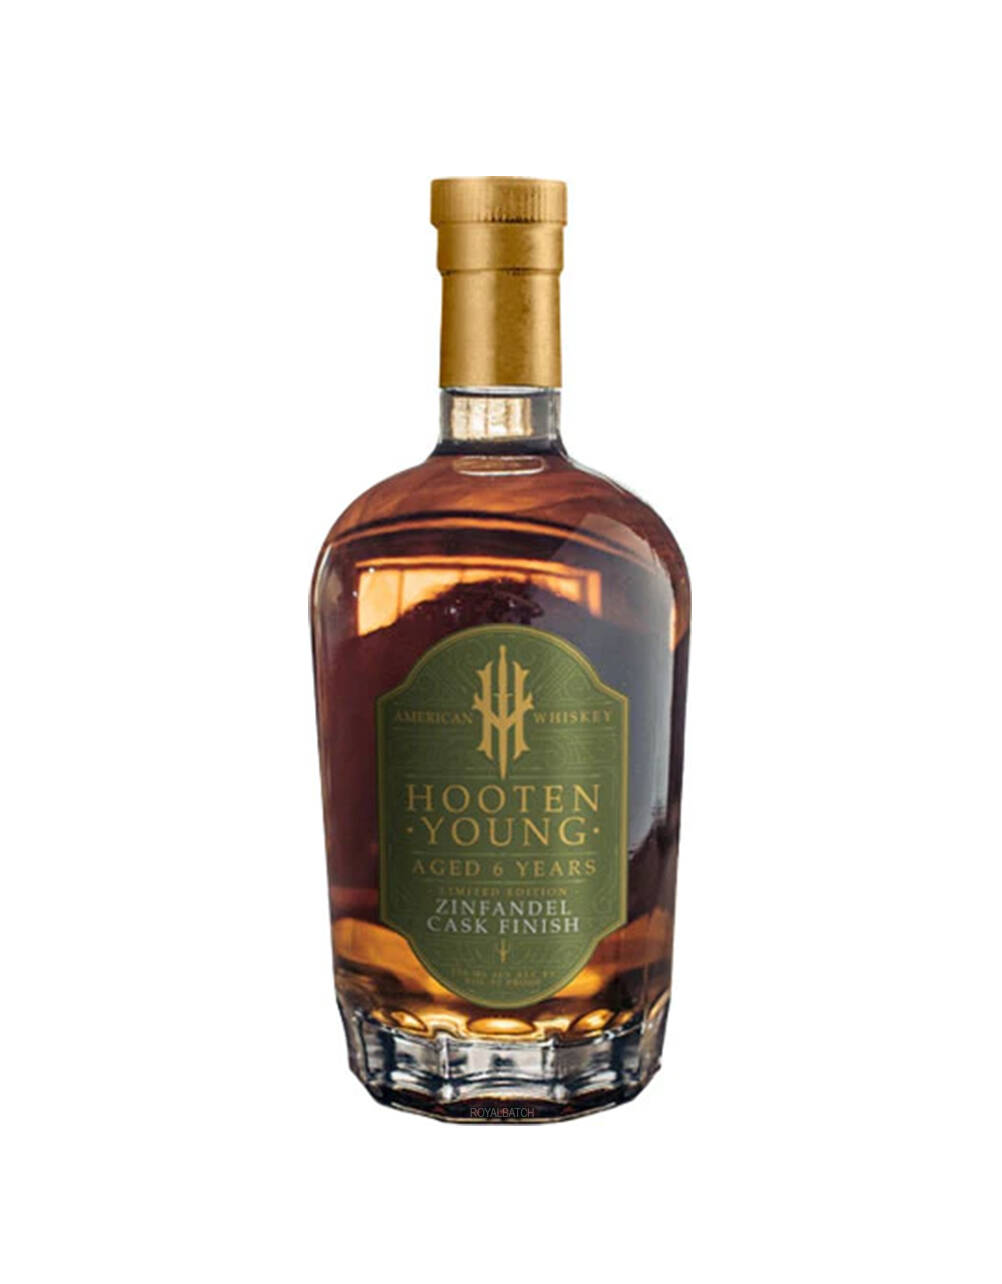 Hooten Young Zinfandel Cask Finish 6 Year Old American Whiskey